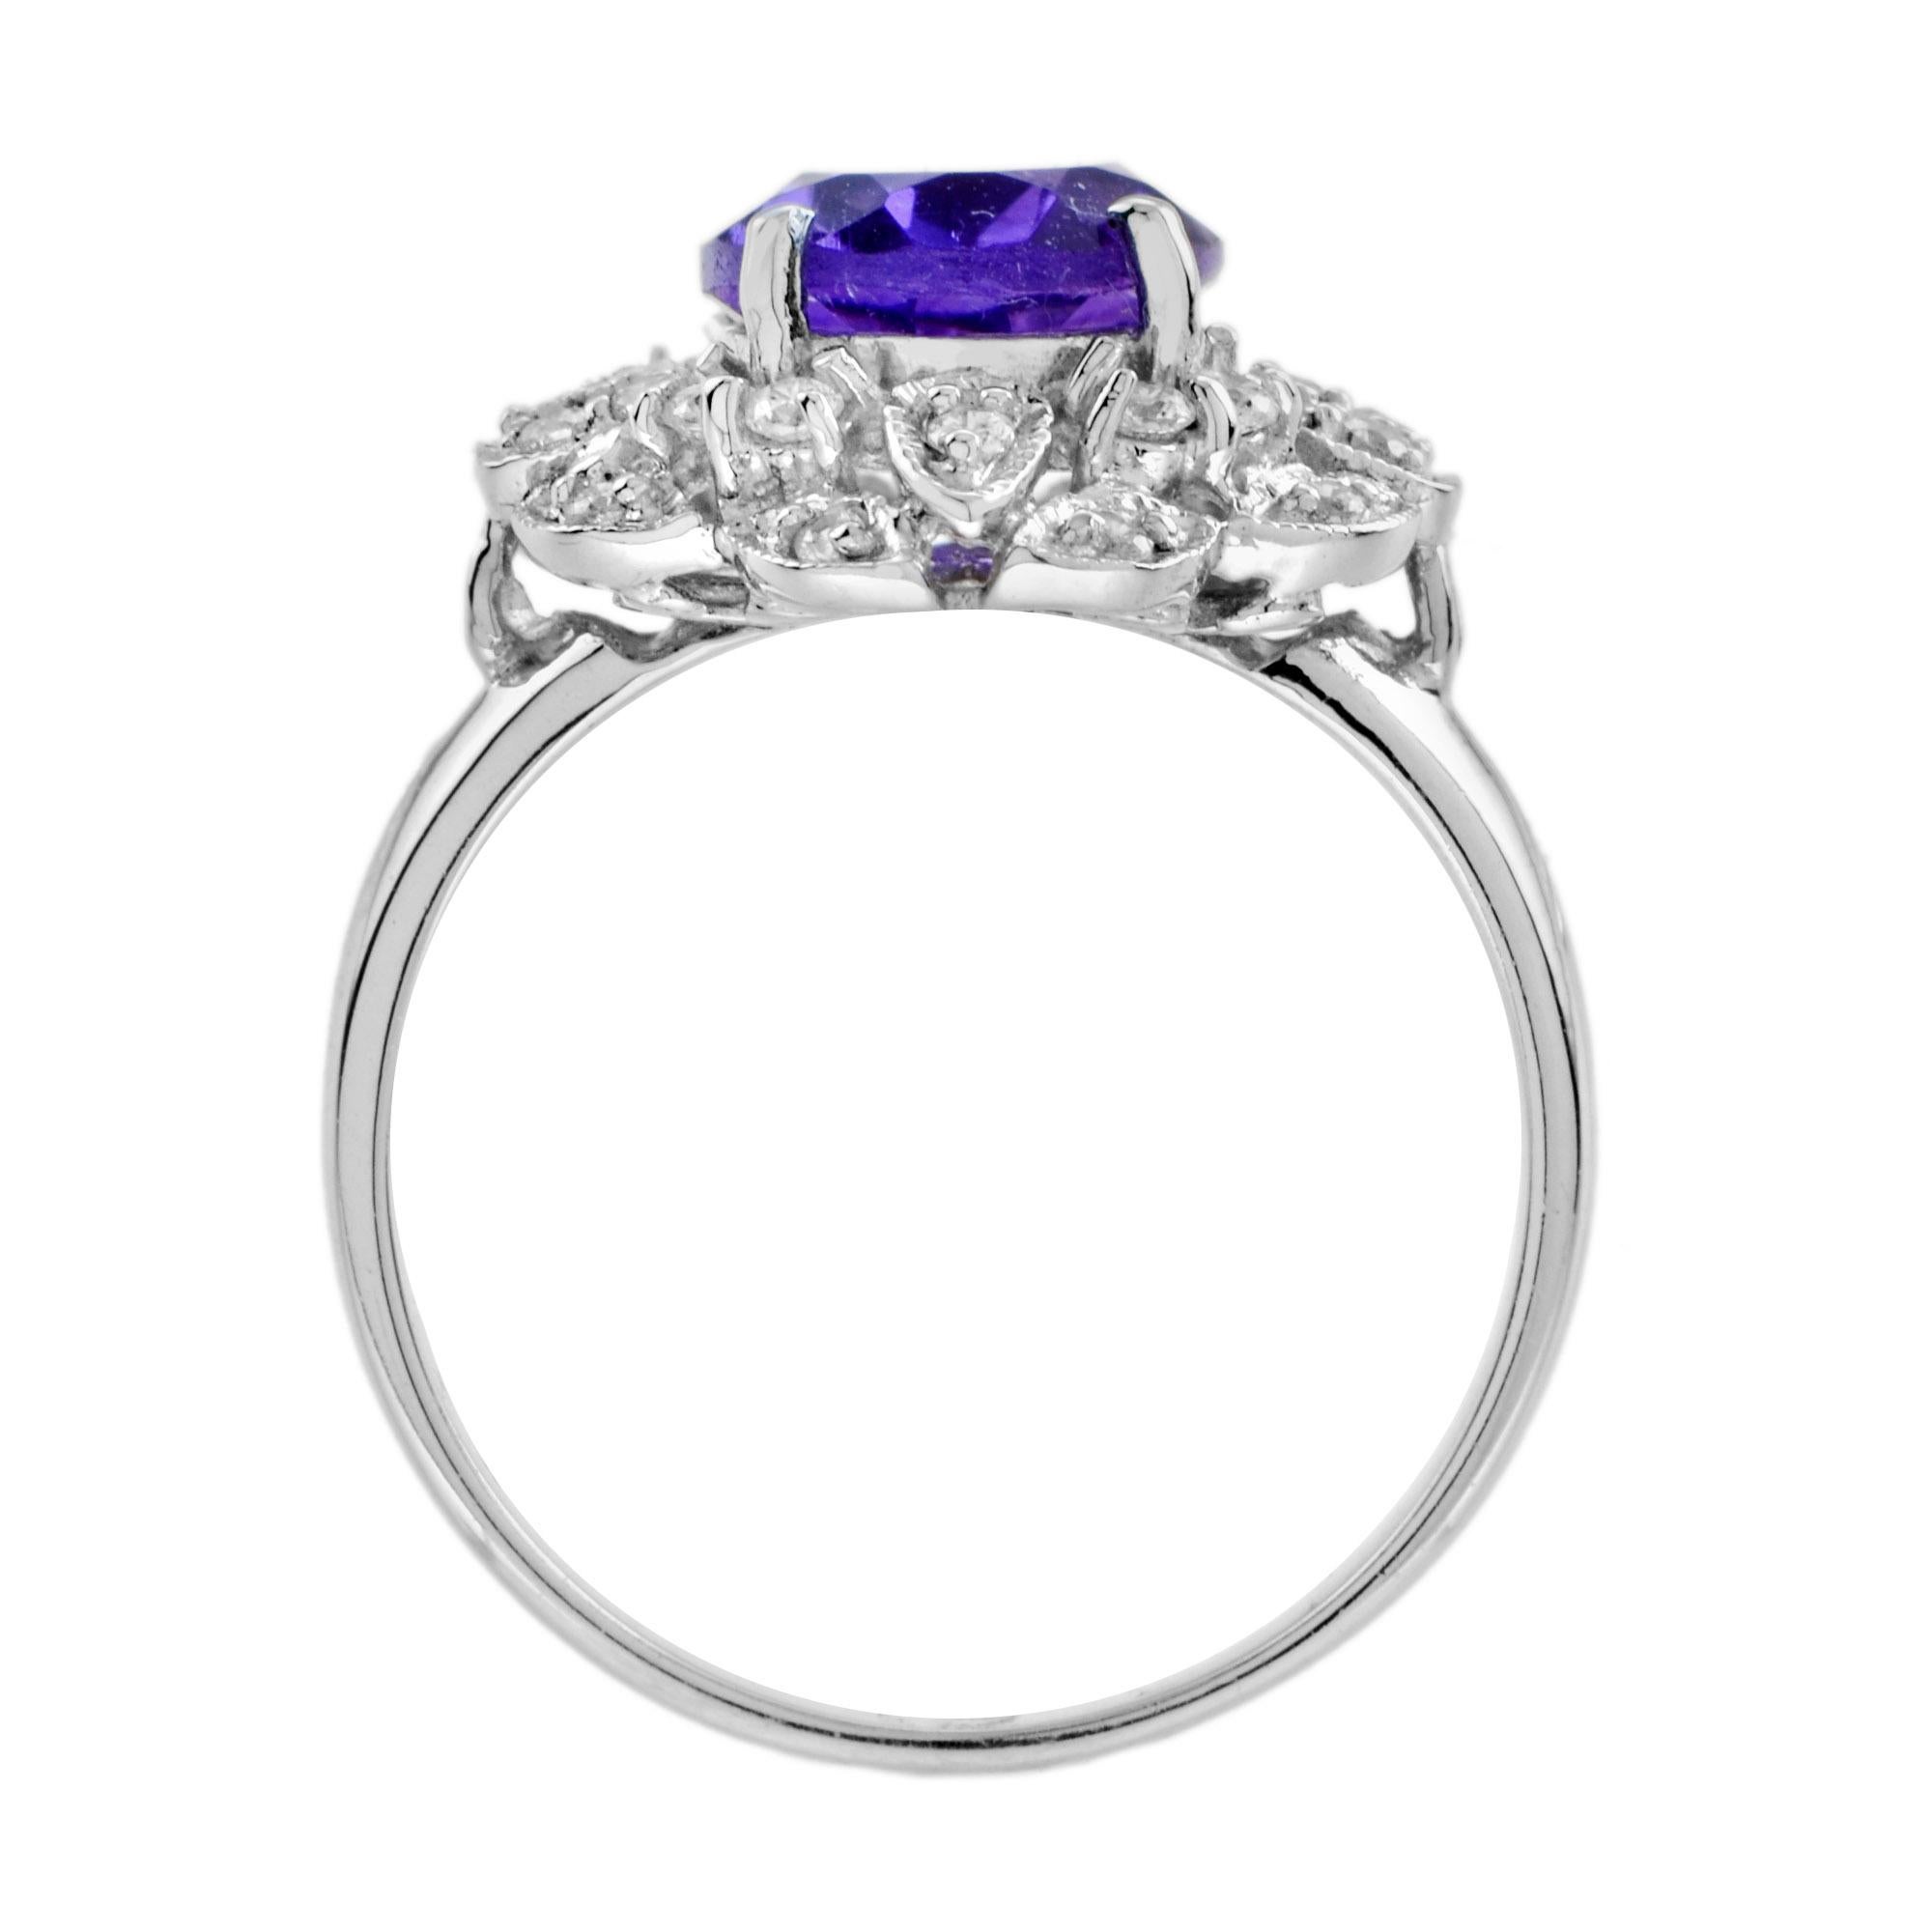 For Sale:  2.6 Ct. Amethyst and Diamond Halo Ring in 18K White Gold 5